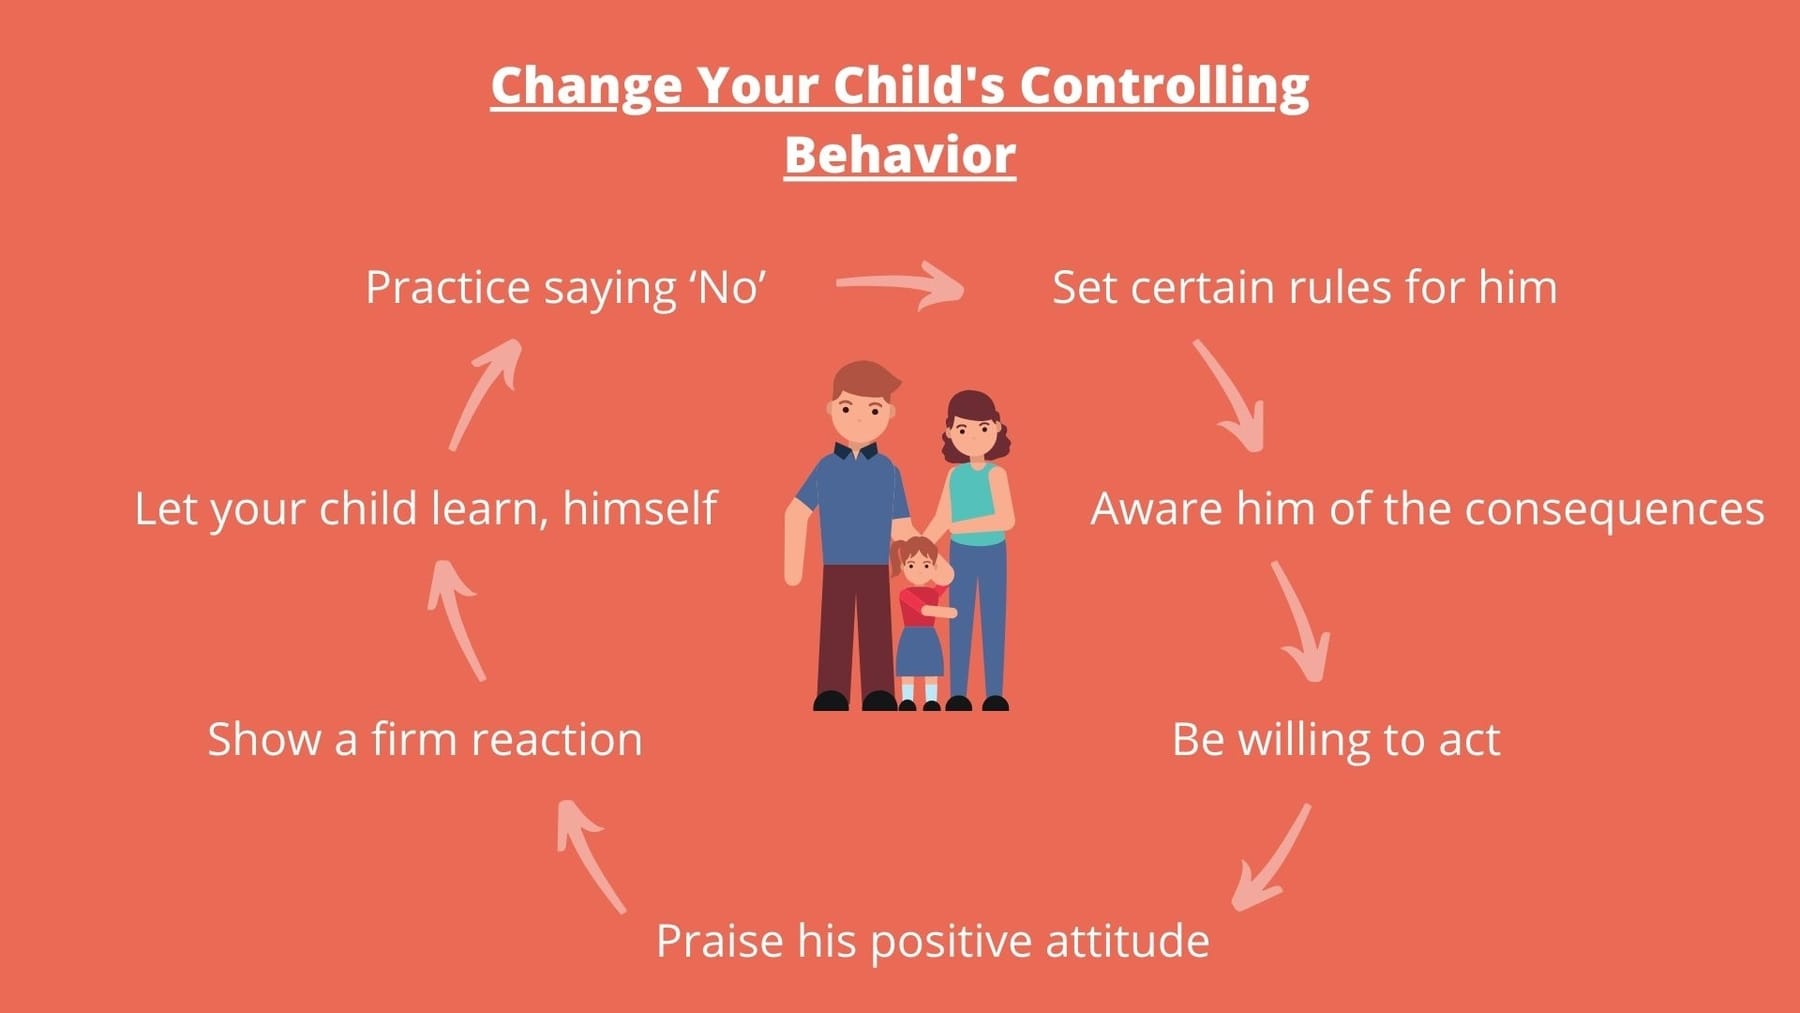 How to Change Child's Controlling Behavior